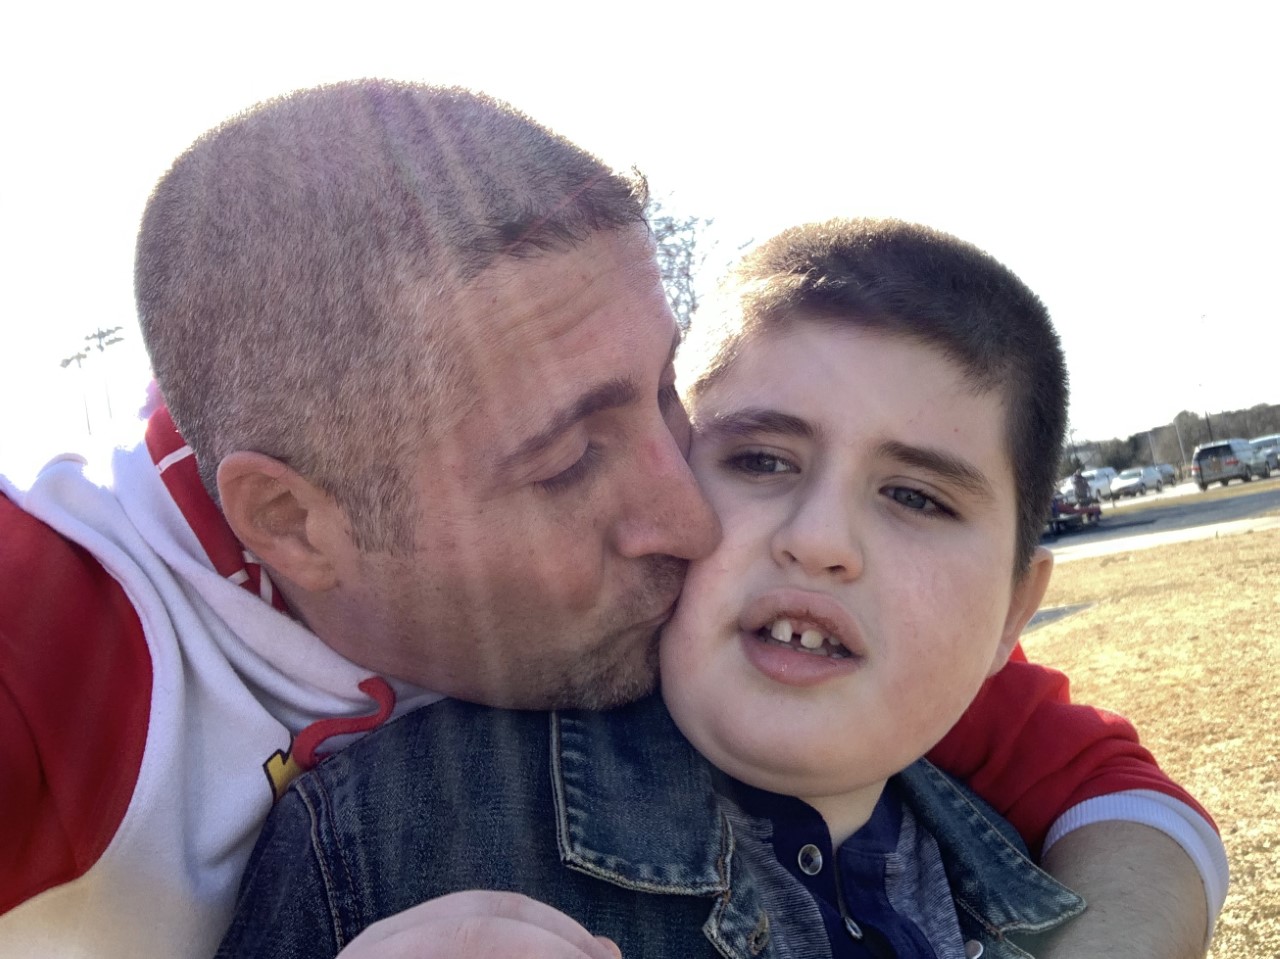 Father kissing his son on the cheek